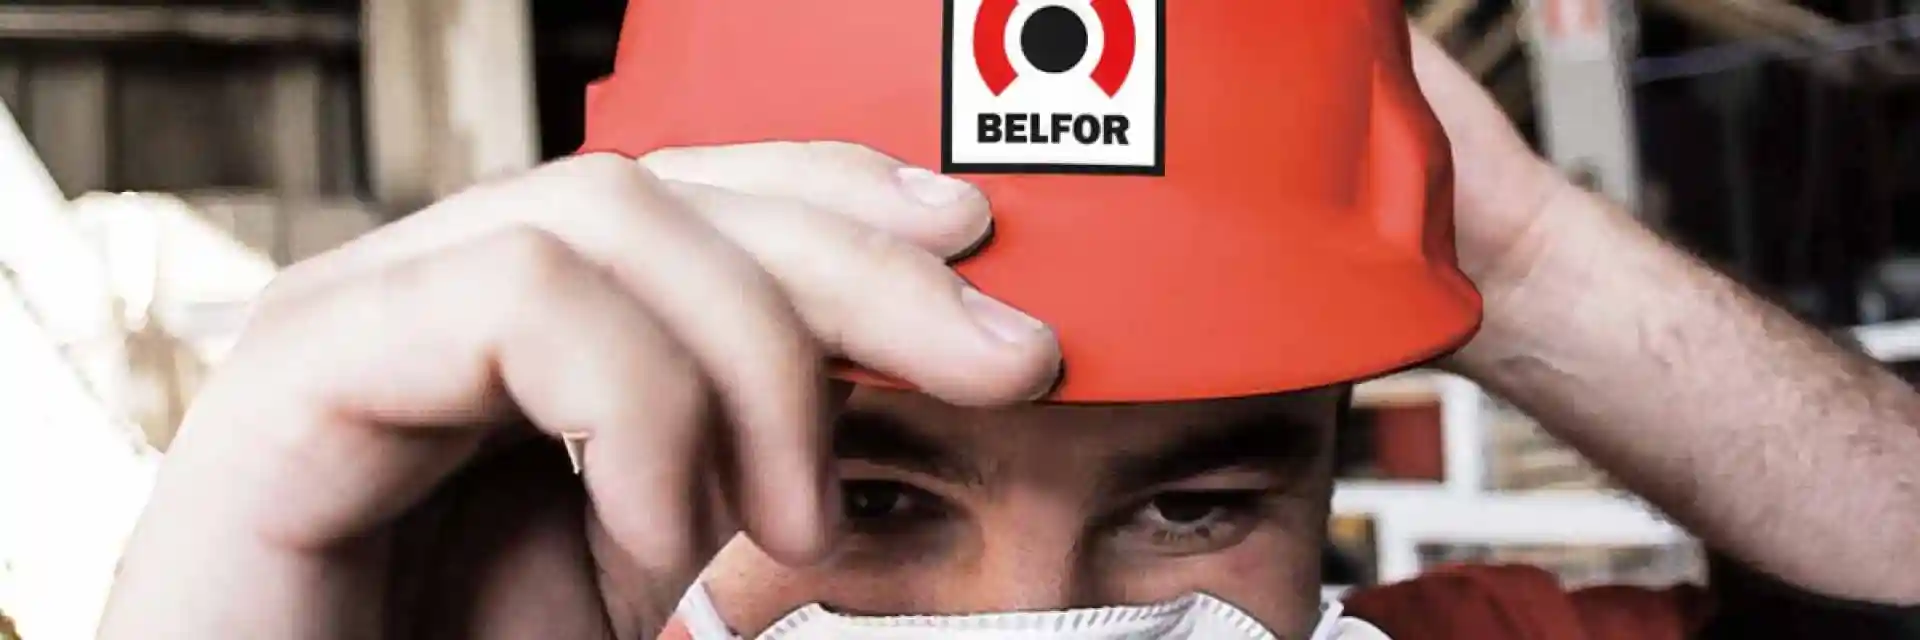 BELFOR man with hard hat